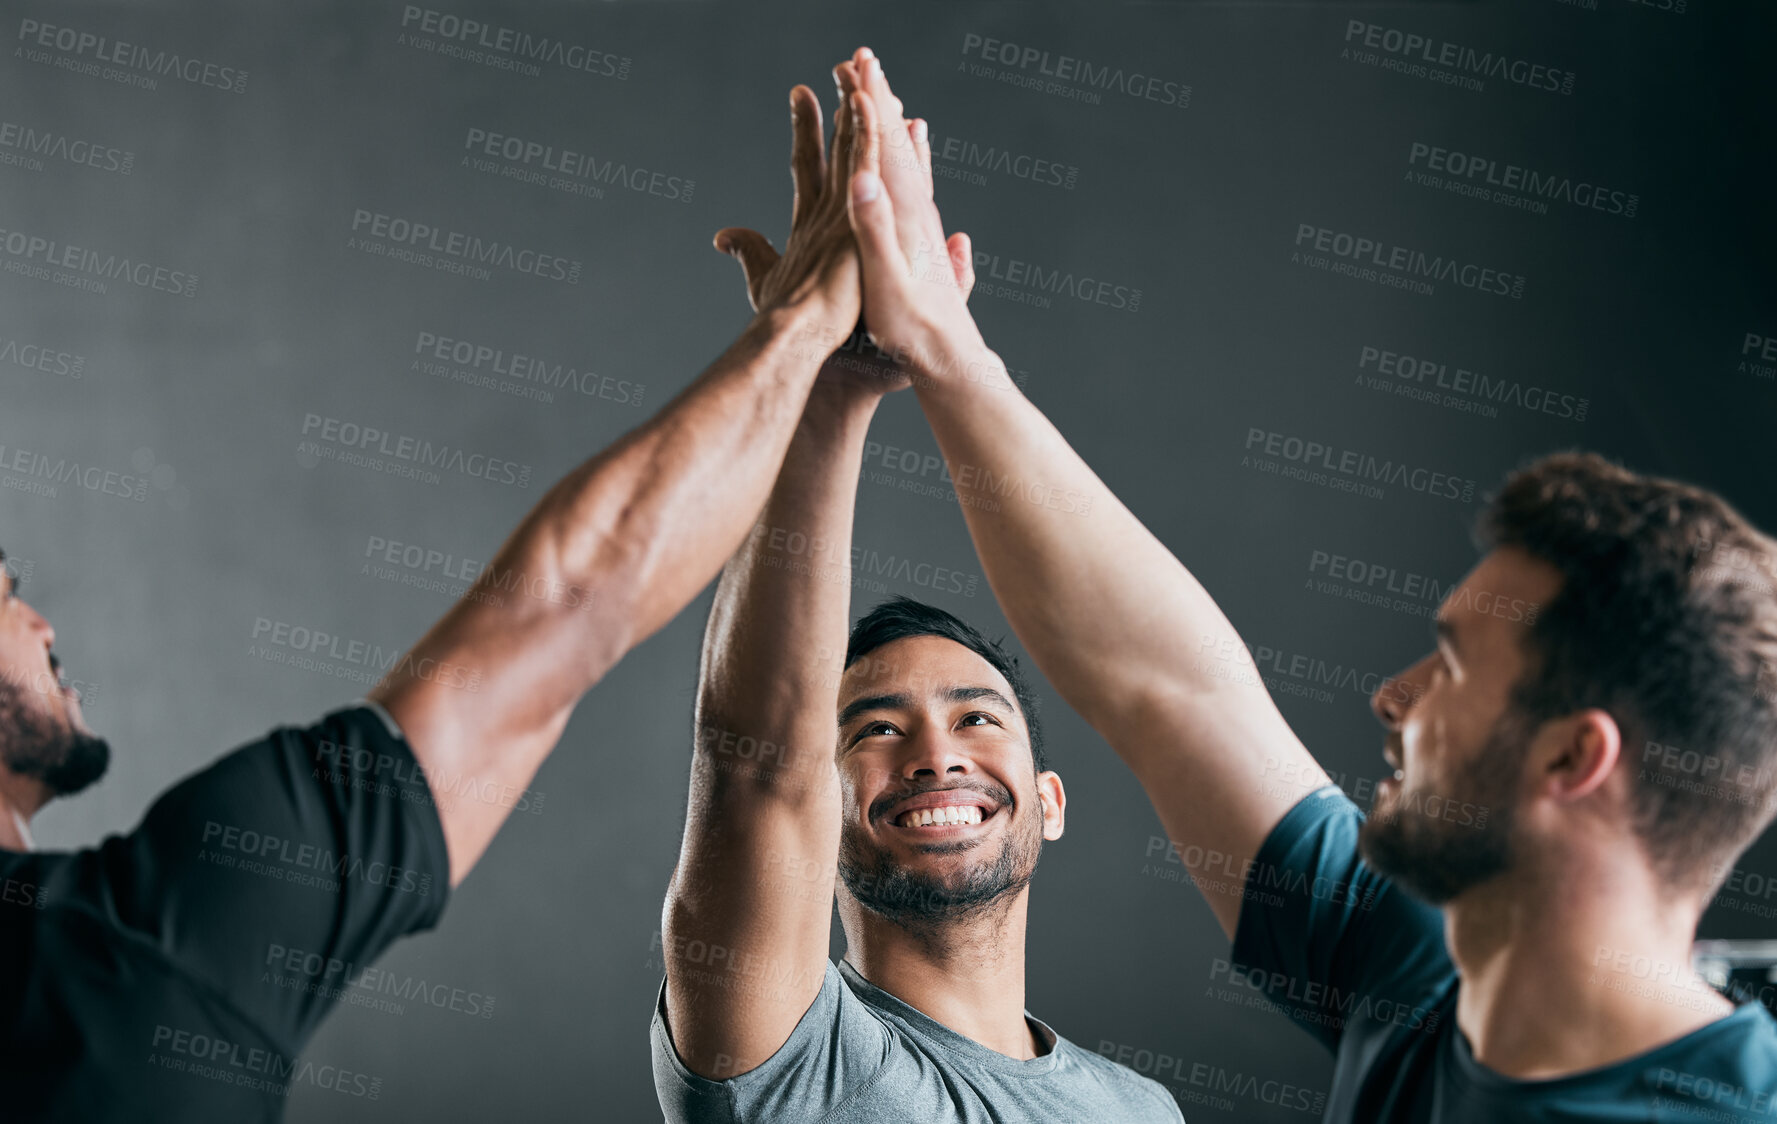 Buy stock photo Cropped shot of a group of handsome young male athletes high fiving against a grey background